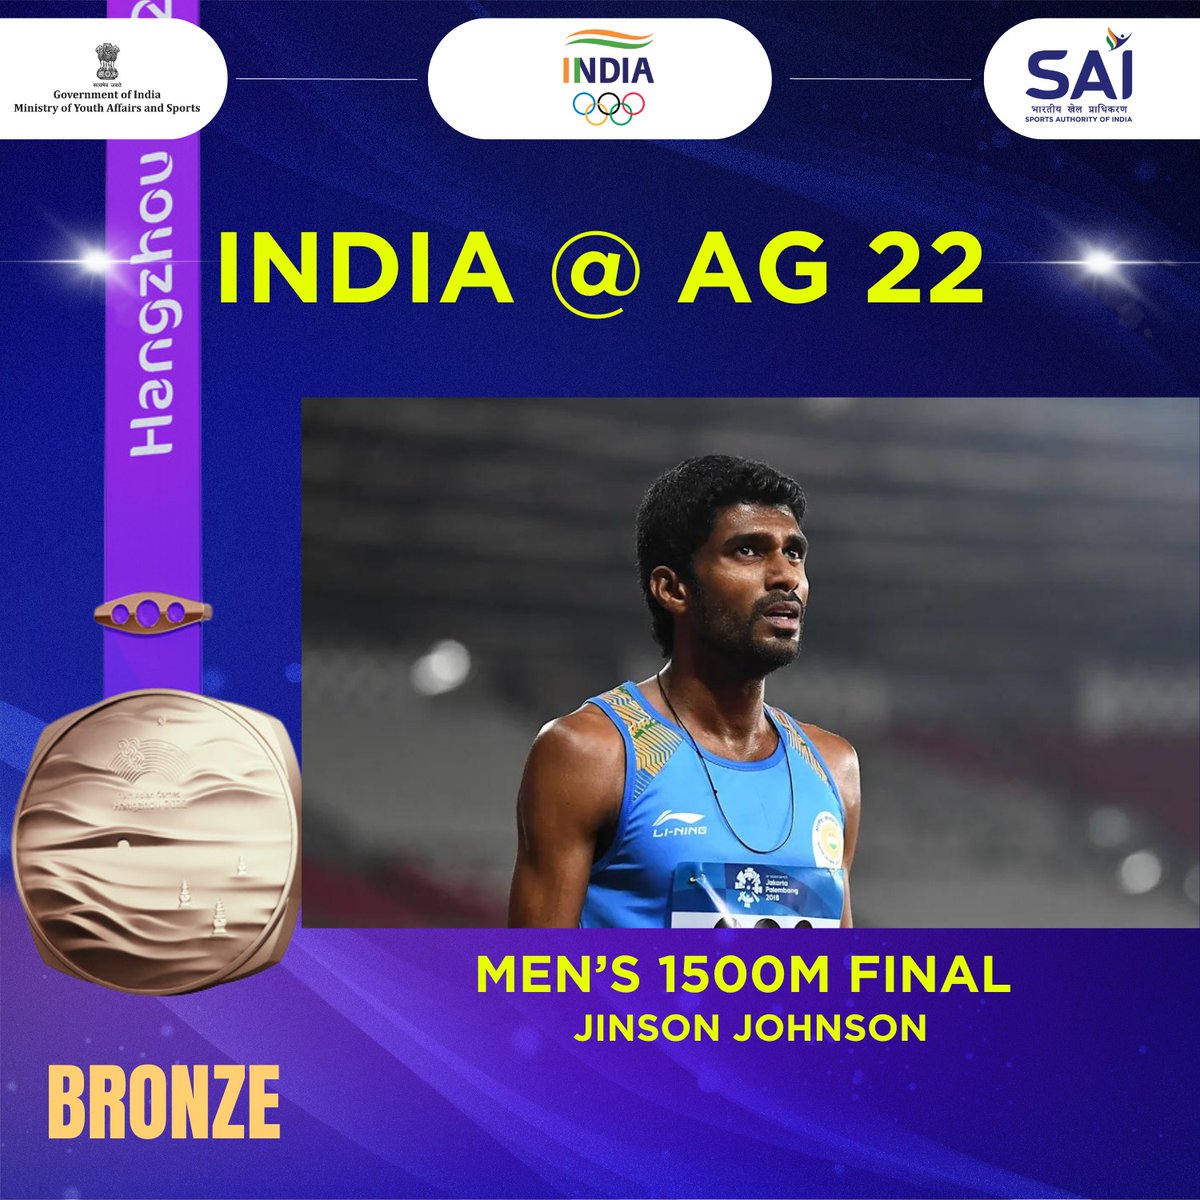 Double Delight for 🇮🇳 in Men's 1500m Finals at #AsianGames2022 Ajay Kumar & @JinsonJohnson5 win a 🥈& 🥉respectively by clocking 3:38.94 & 3:39.74 Totally made our day! Many congratulations to both💪🏻👏 #Cheer4India #HallaBol #JeetegaBharat #BharatAtAG22